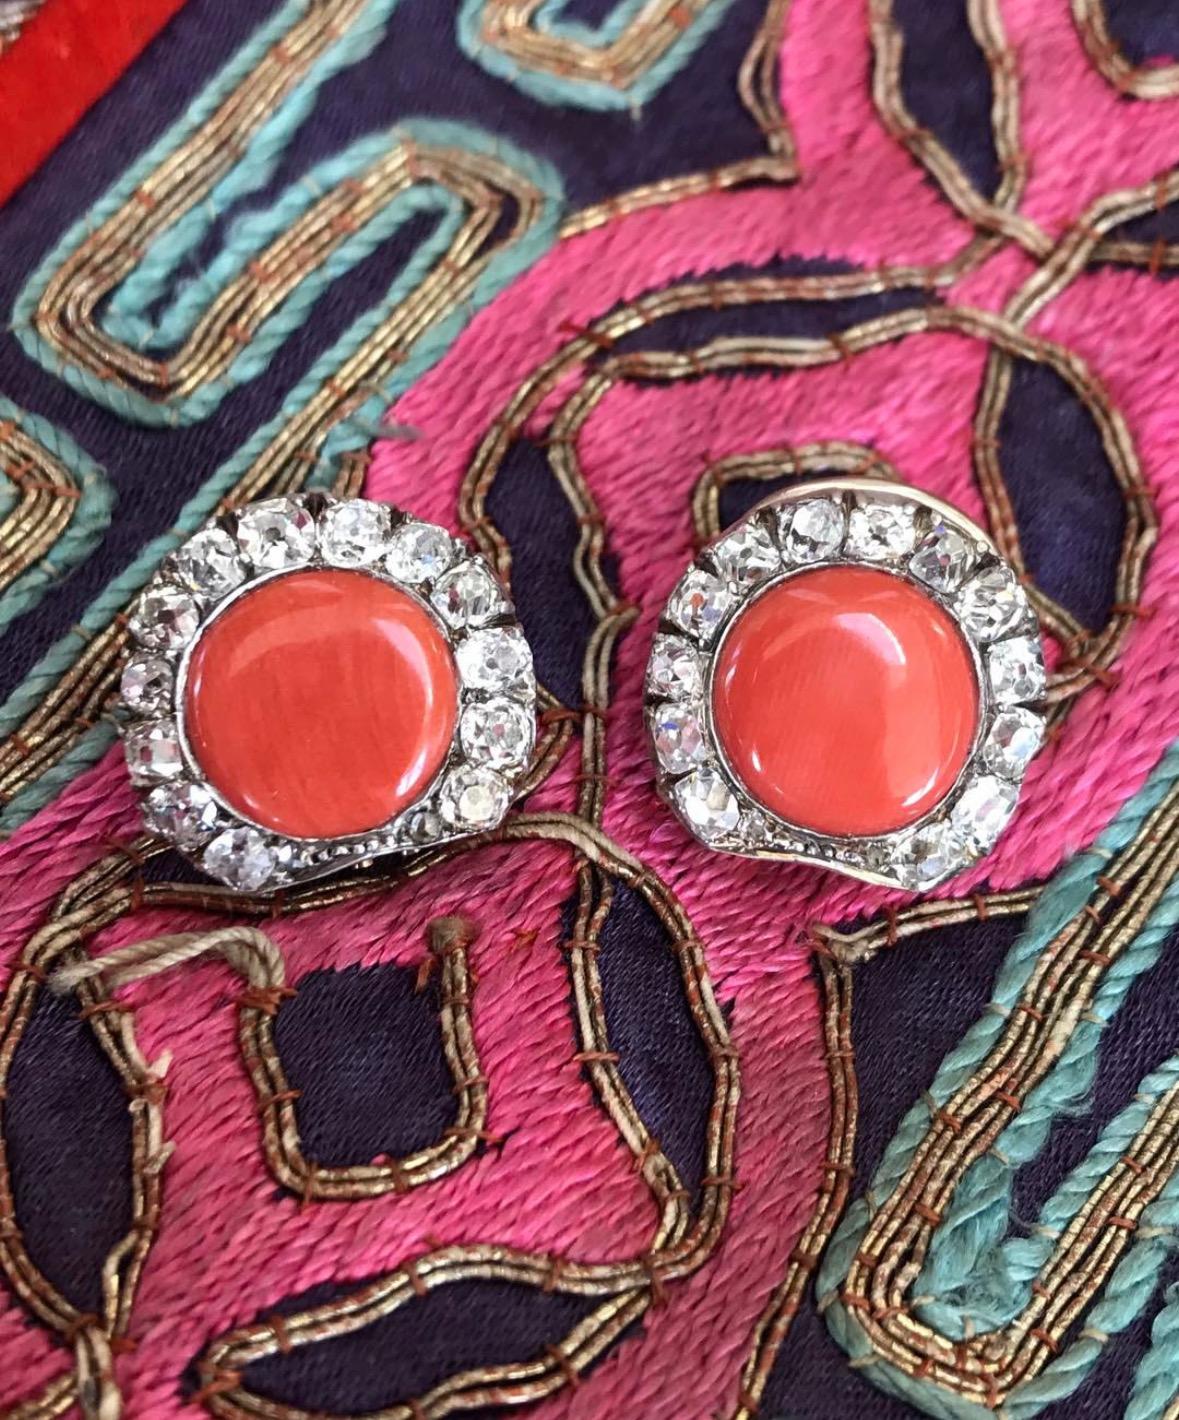 Perfect of summer, this lovely pair of antique coral conversion earrings features a flat, 11 mm coral disk surrounded by border of glittering cushion cut diamonds. Fabricated in silver topped 14 karat gold. 

Notes: It is likely that these earrings